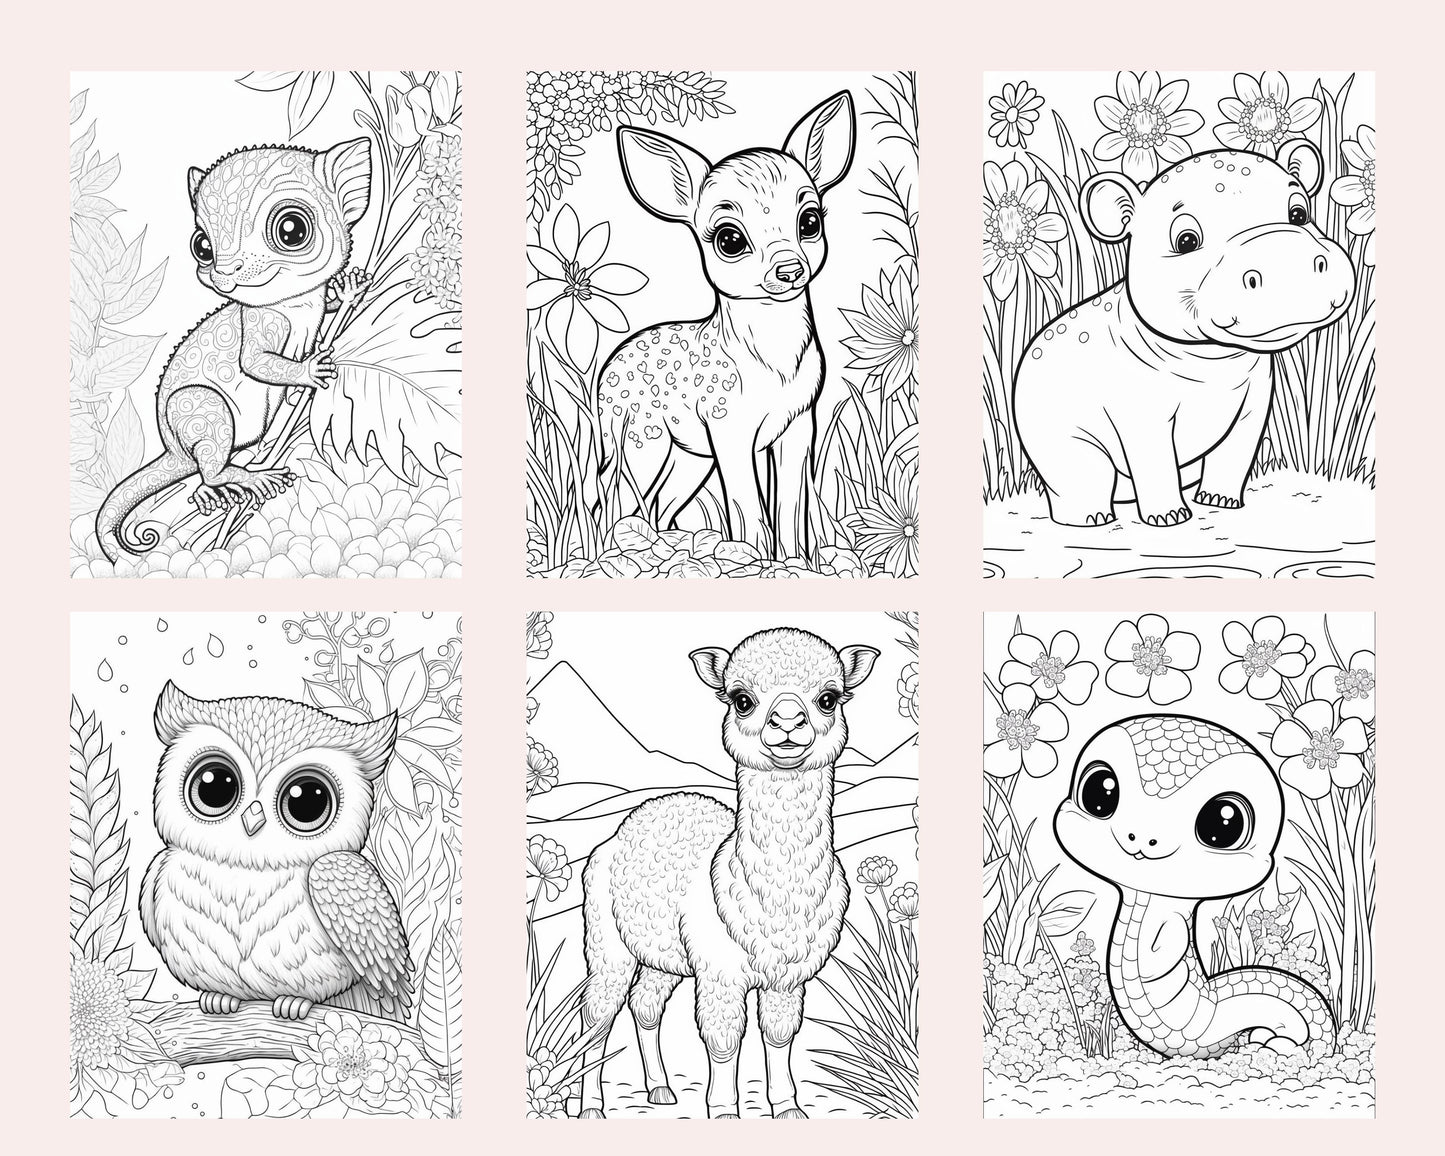 60 Cute Animals Printable Coloring Pages for Kids, Printable PDF File Instant Download - raspiee